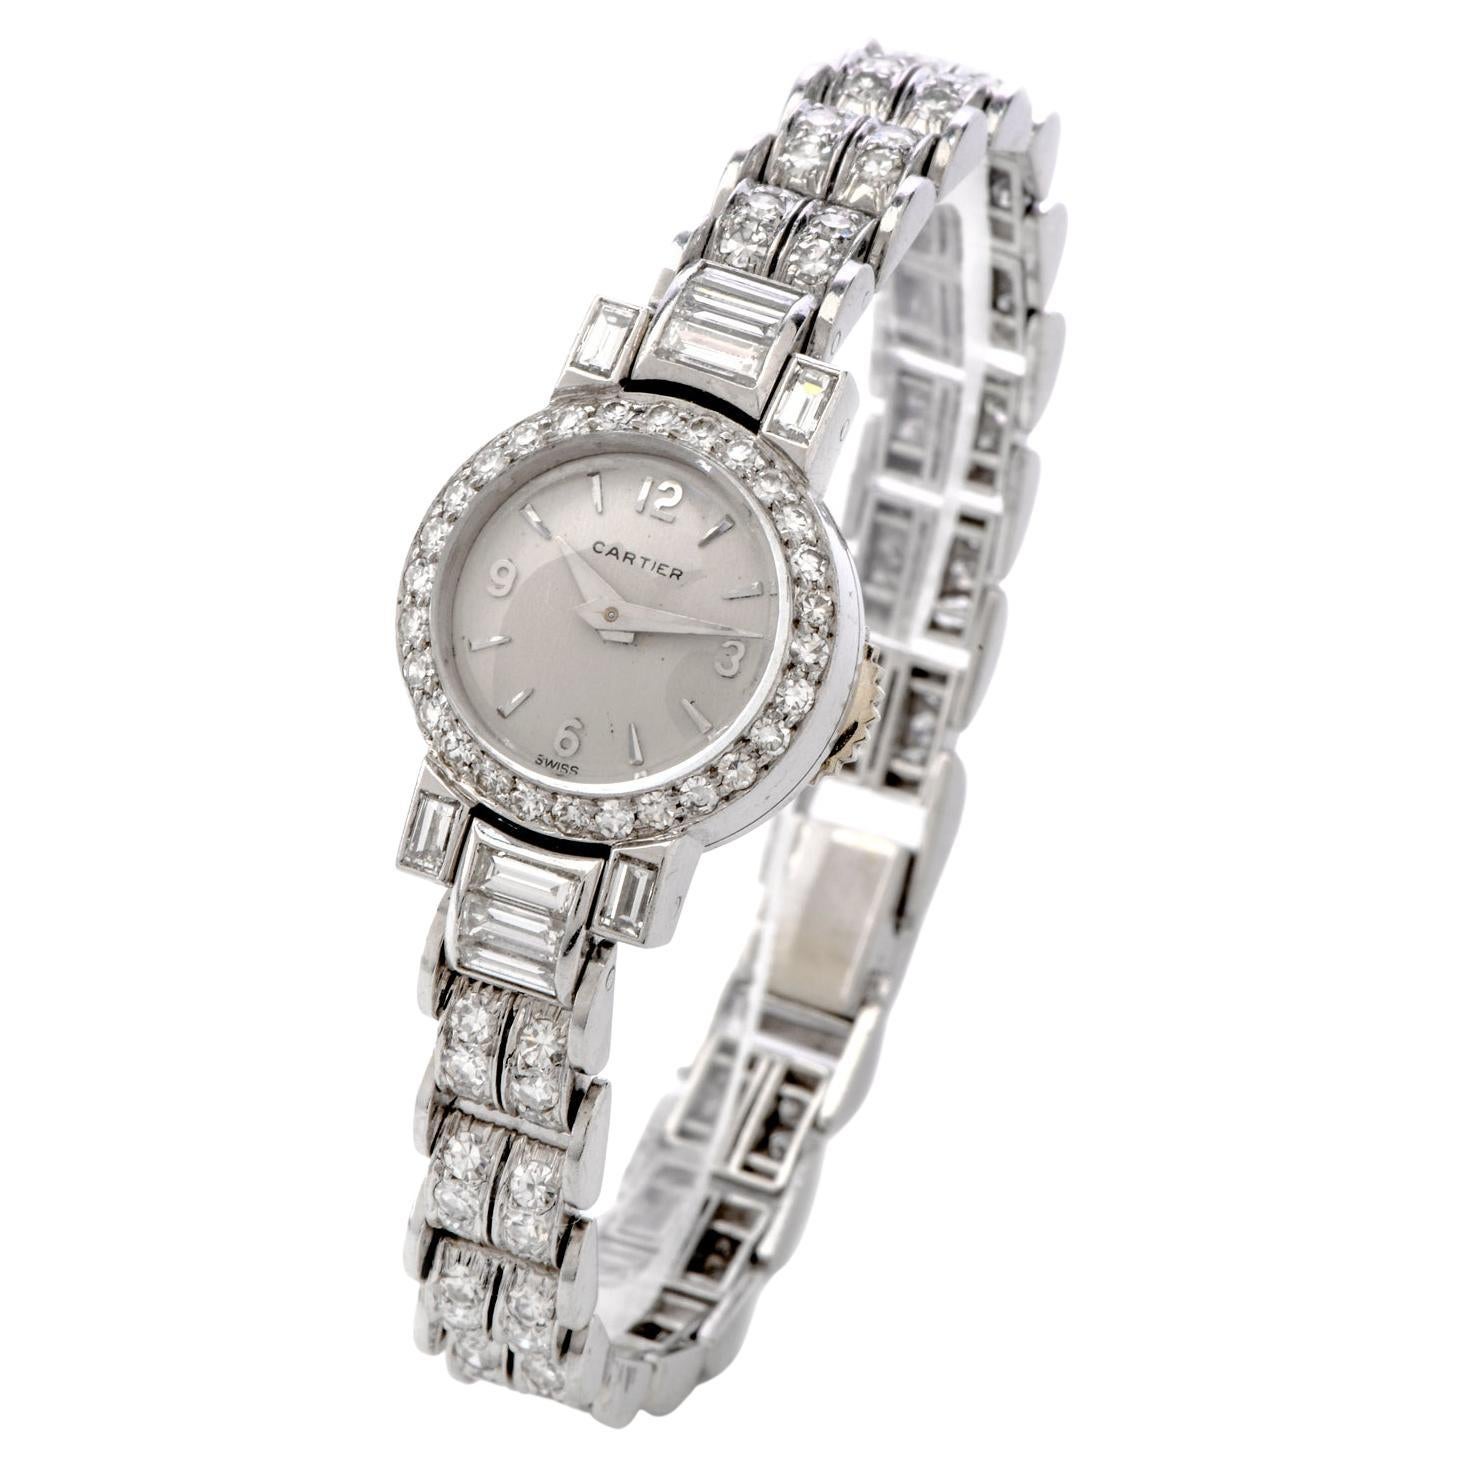 This timeless Vintage Cartier Ladies' diamond watch is crafted in sensual 32.4 grams of platinum. This flexible link watch was created in the 1960s era.   Features 10 large baguette cut Diamonds and 108 round faceted icy white Diamonds surrounding